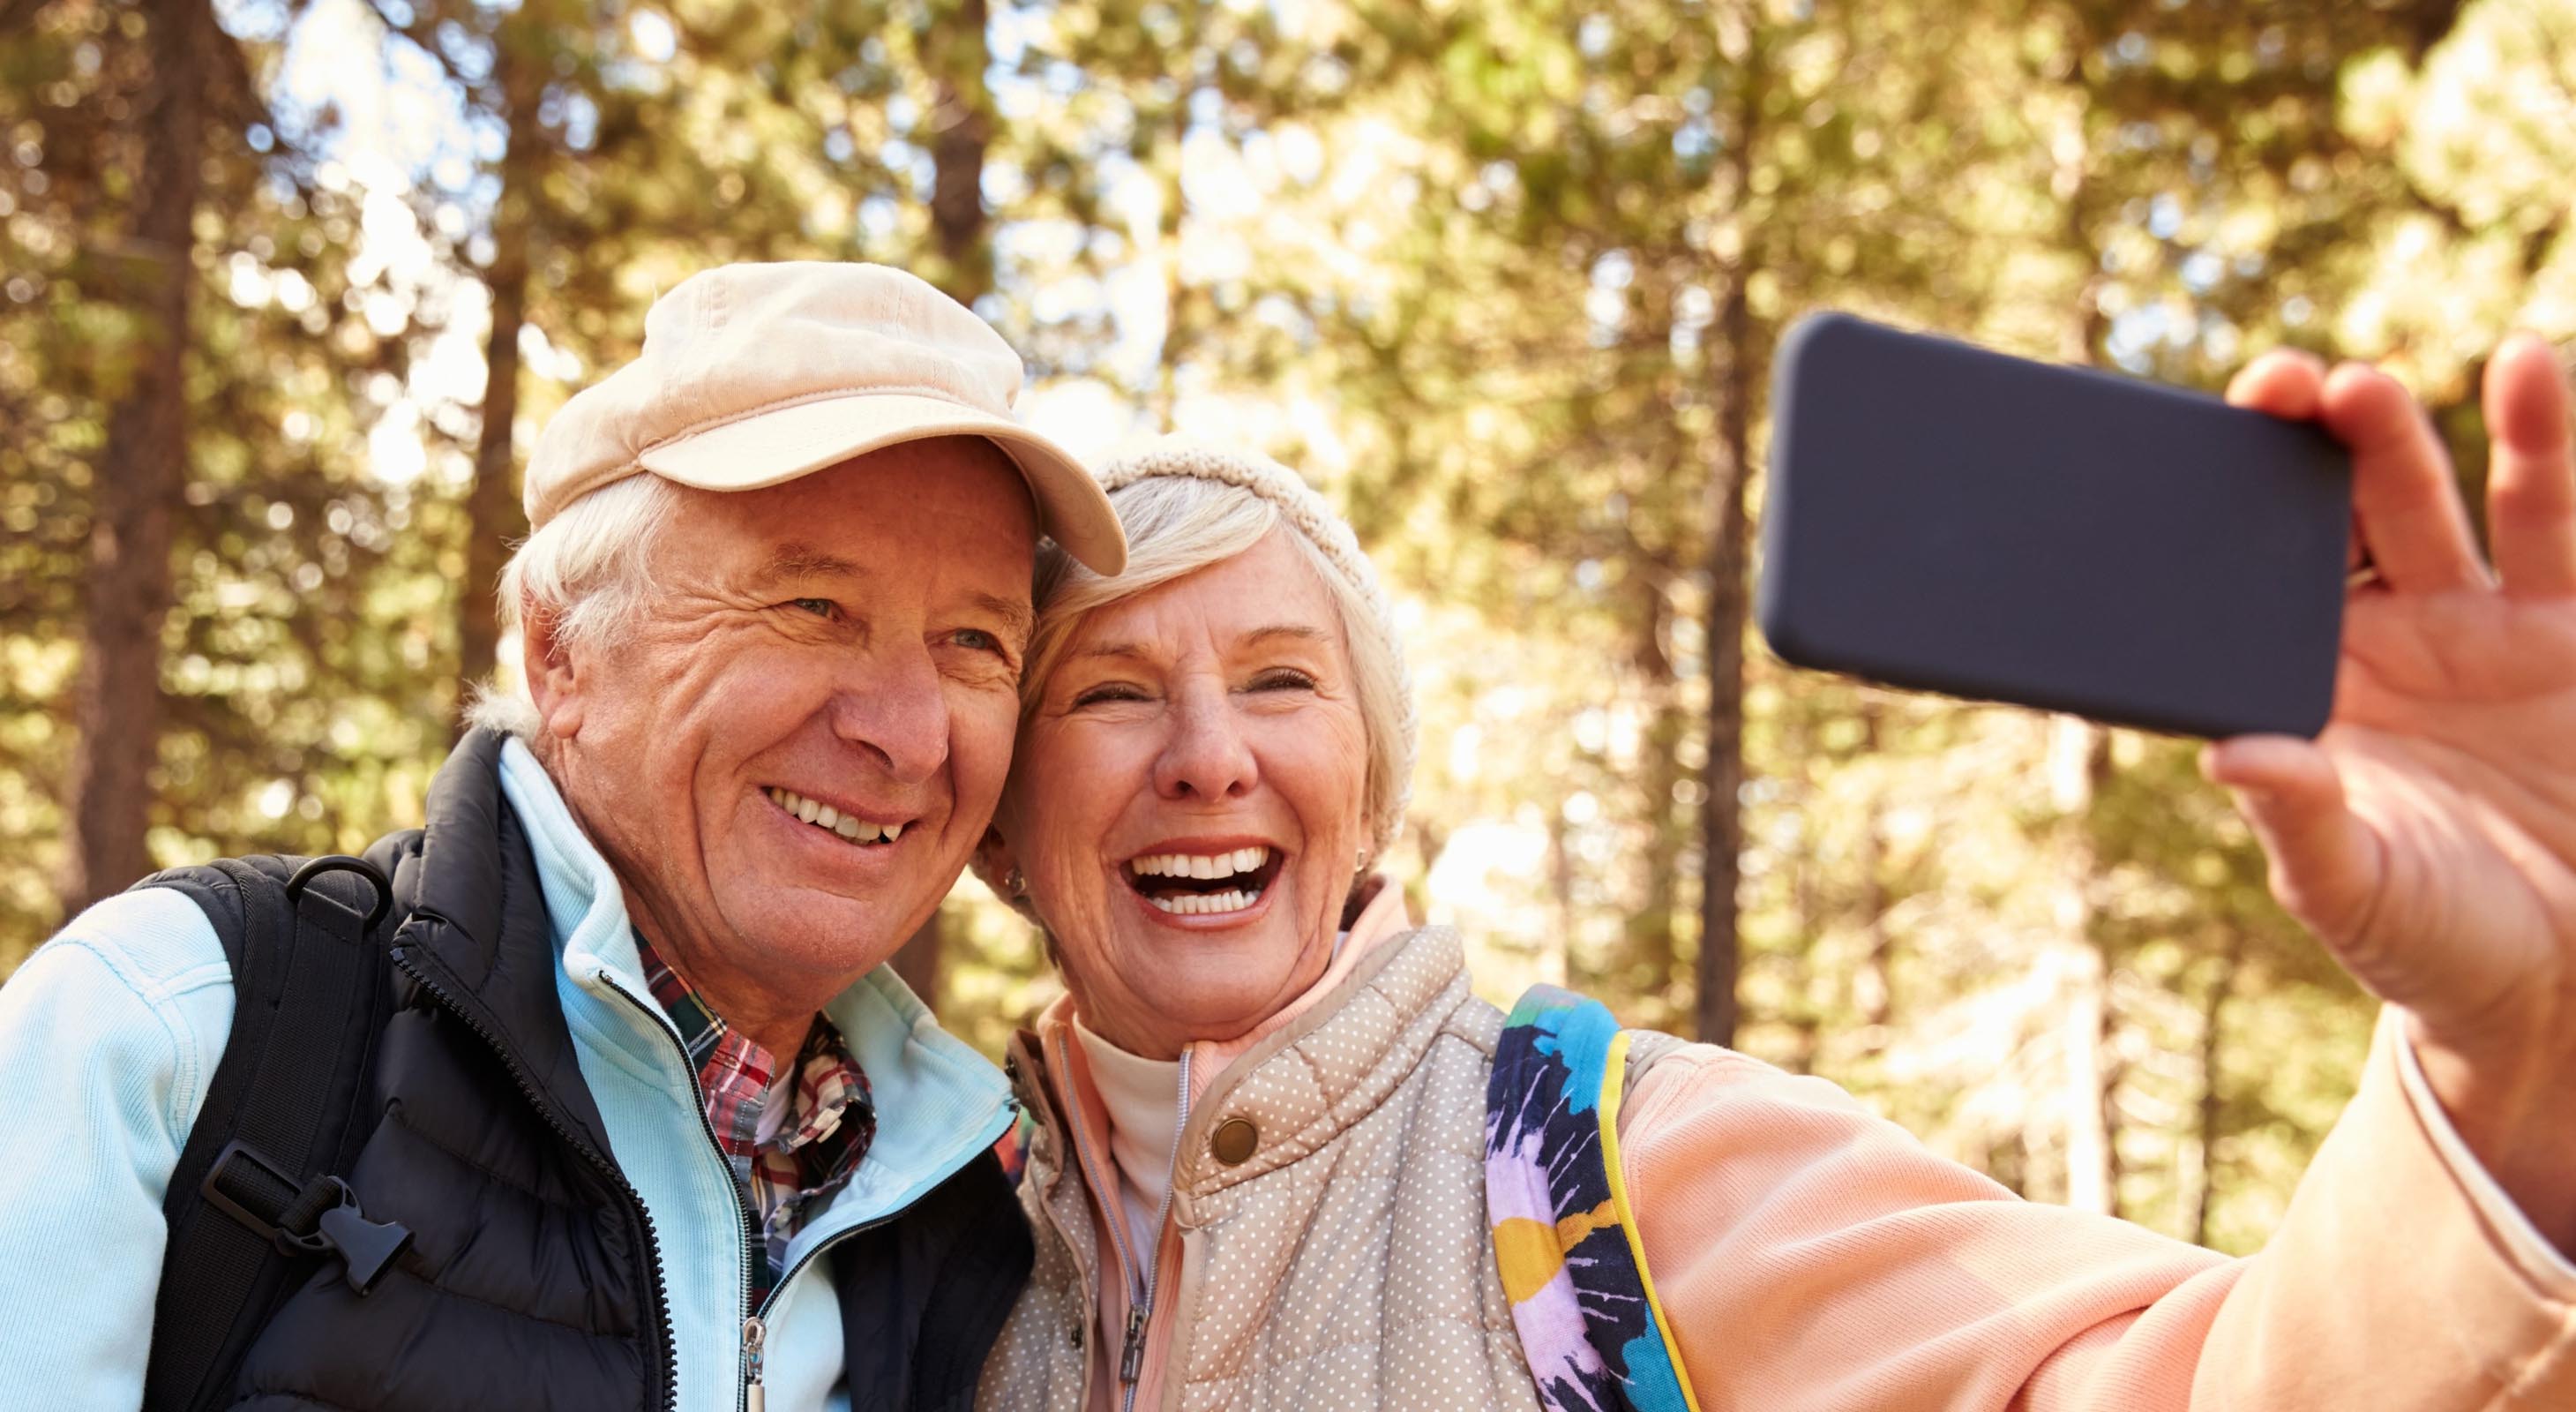 Elderly couple smiling and taking a selfie